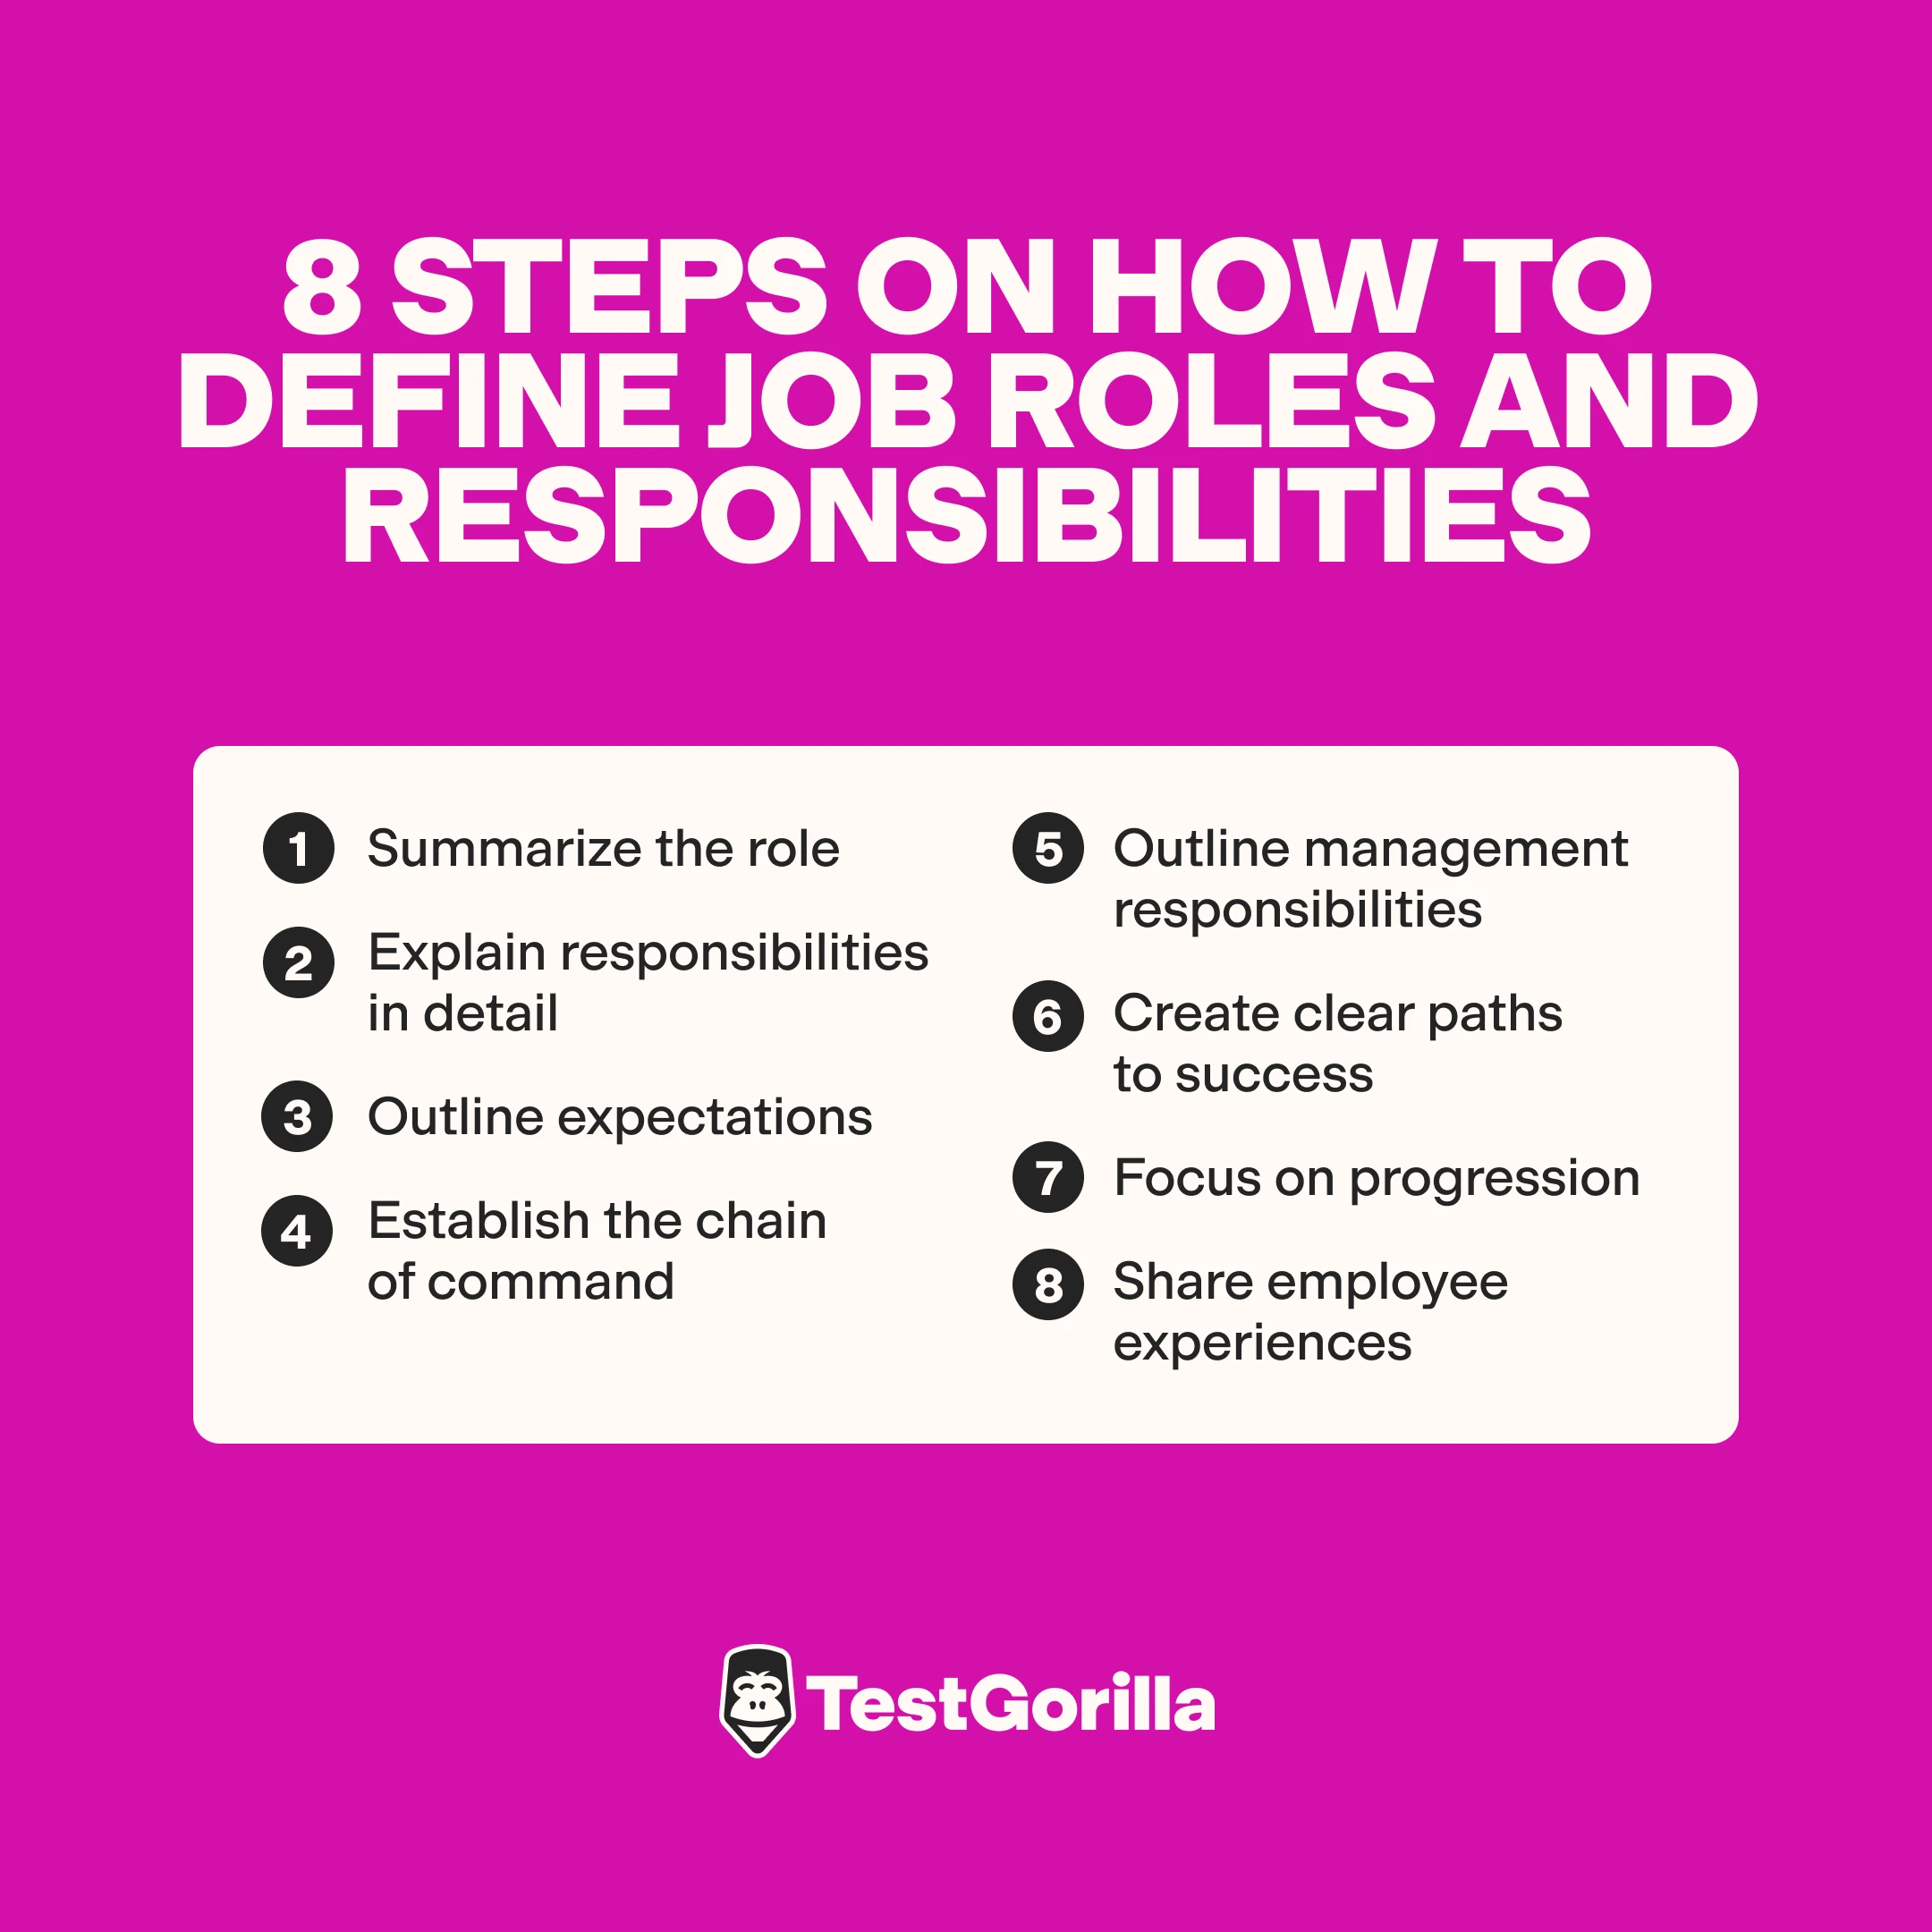 How to define job roles and responsibilities: 8 steps 
